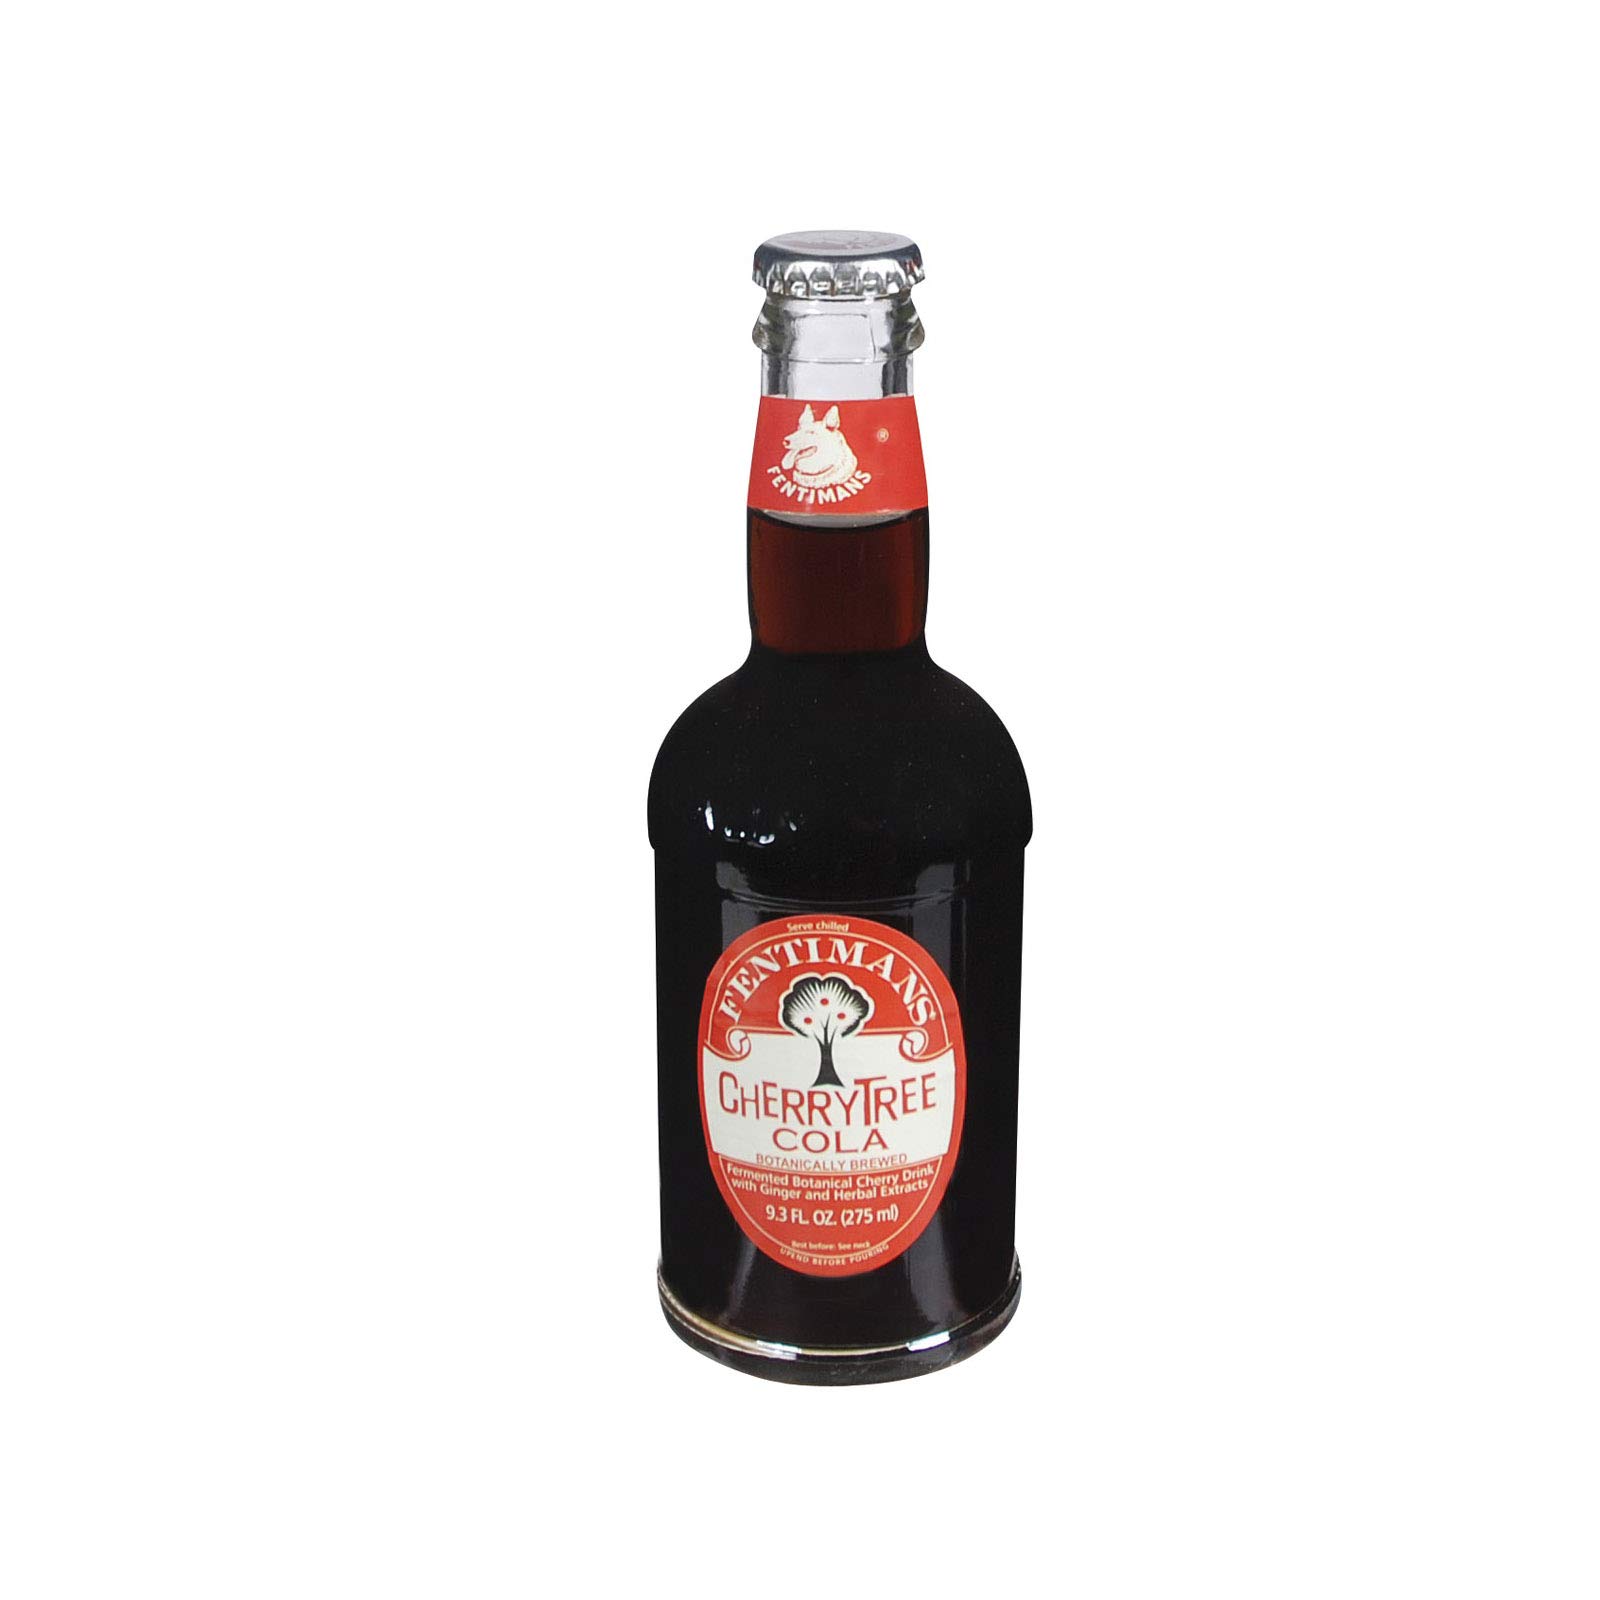 Fentimans Cherry Tree Cola, 9.3 Ounce - 4 per pack - 6 packs per case.